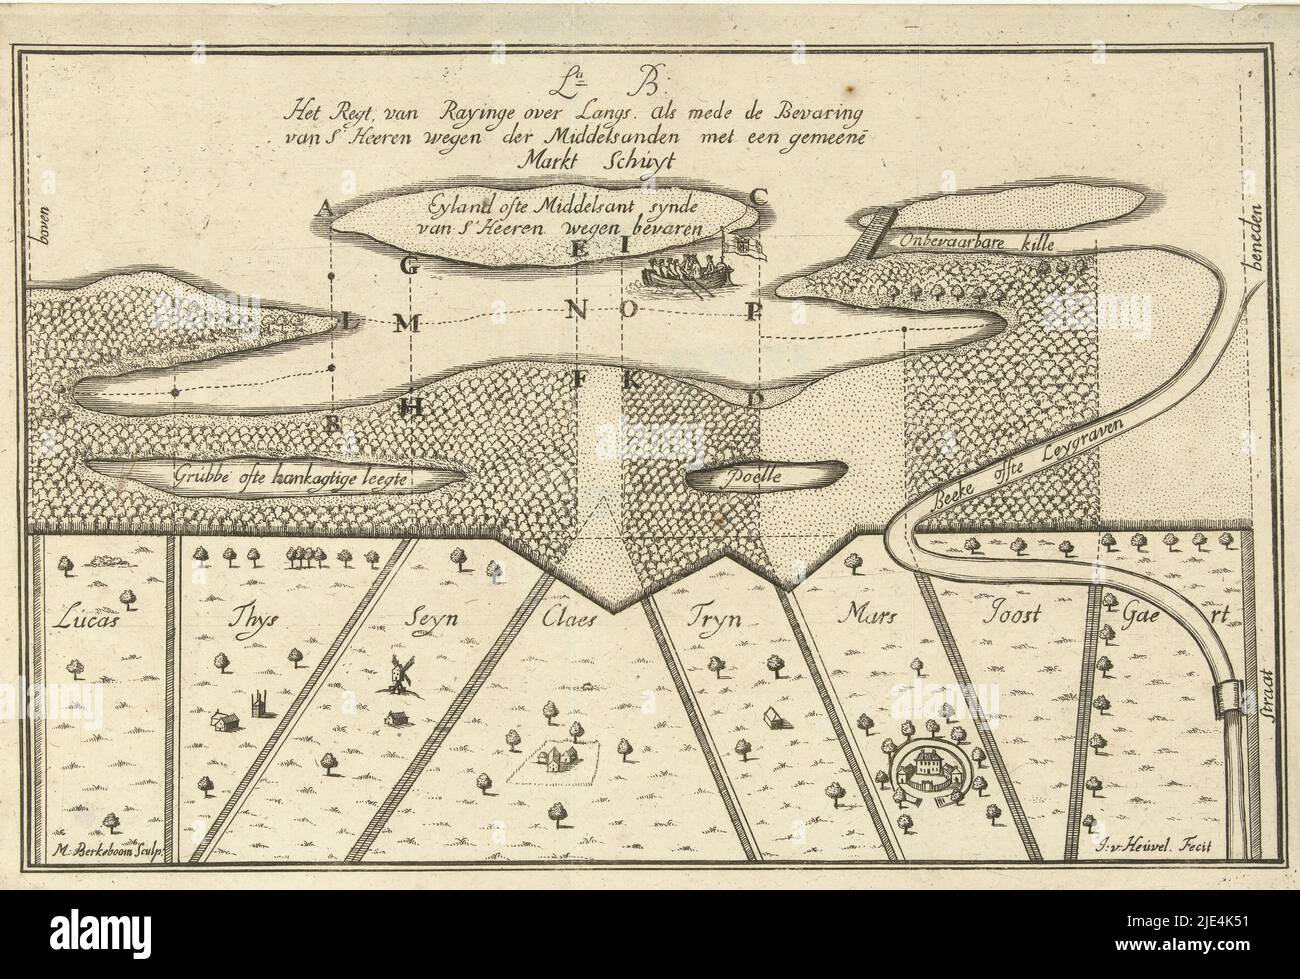 Map of a bay in the coastline (with letters), Martinus Berkenboom, after J. van Heuvel, 1650 - 1715, Map of a bay in the coastline. Print is part of a series of prints on hydraulic engineering and reclamation., print maker: Martinus Berkenboom, (mentioned on object), J. van Heuvel, (mentioned on object), Nijmegen, 1650 - 1715, paper, etching, h 200 mm × w 302 mm Stock Photo